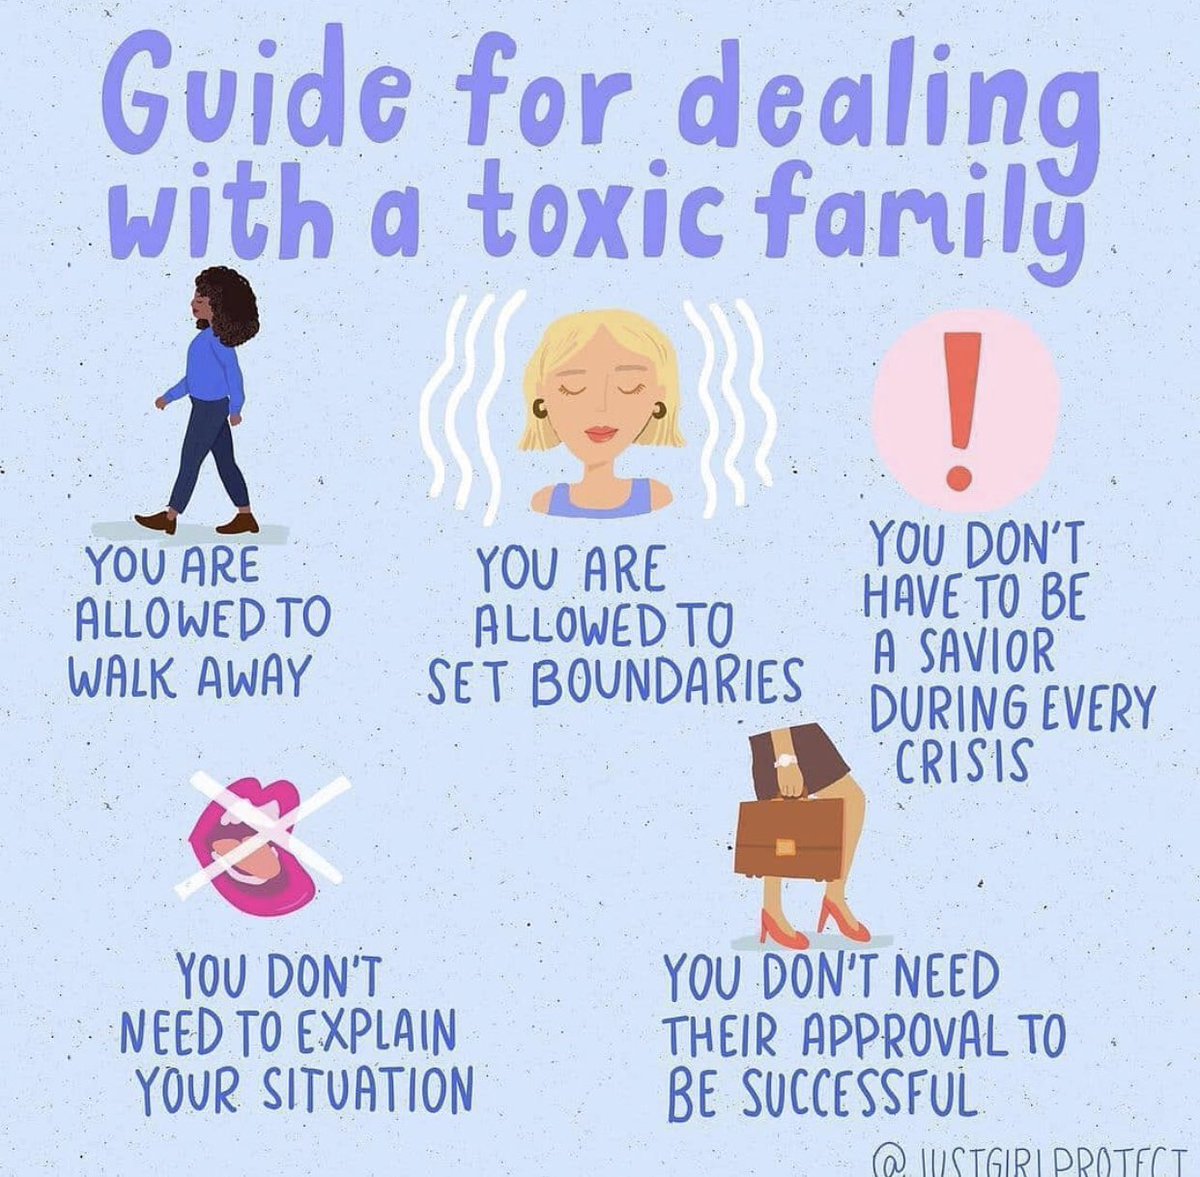 NEVER CONDONE TOXICITY! 

You are allowed to walk away cos you matter too and your sanity should be your priority.

#mentalhealthadvocate  #mentalhealthmatters  #counselingpsychology #mentalhealth